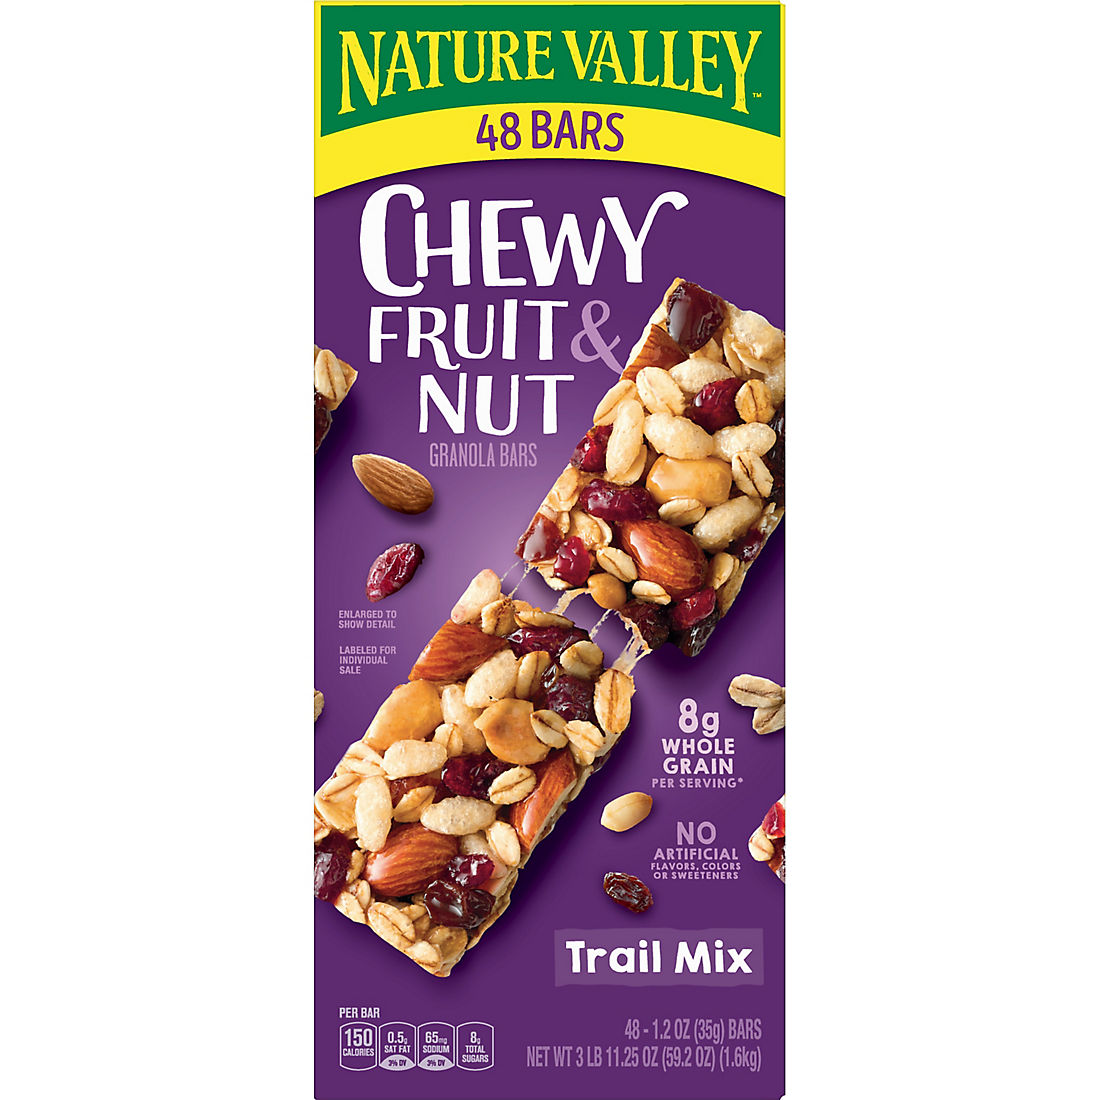 Nature Valley Fruit & Nut Trail Mix Chewy Granola Bars, 48 ct.